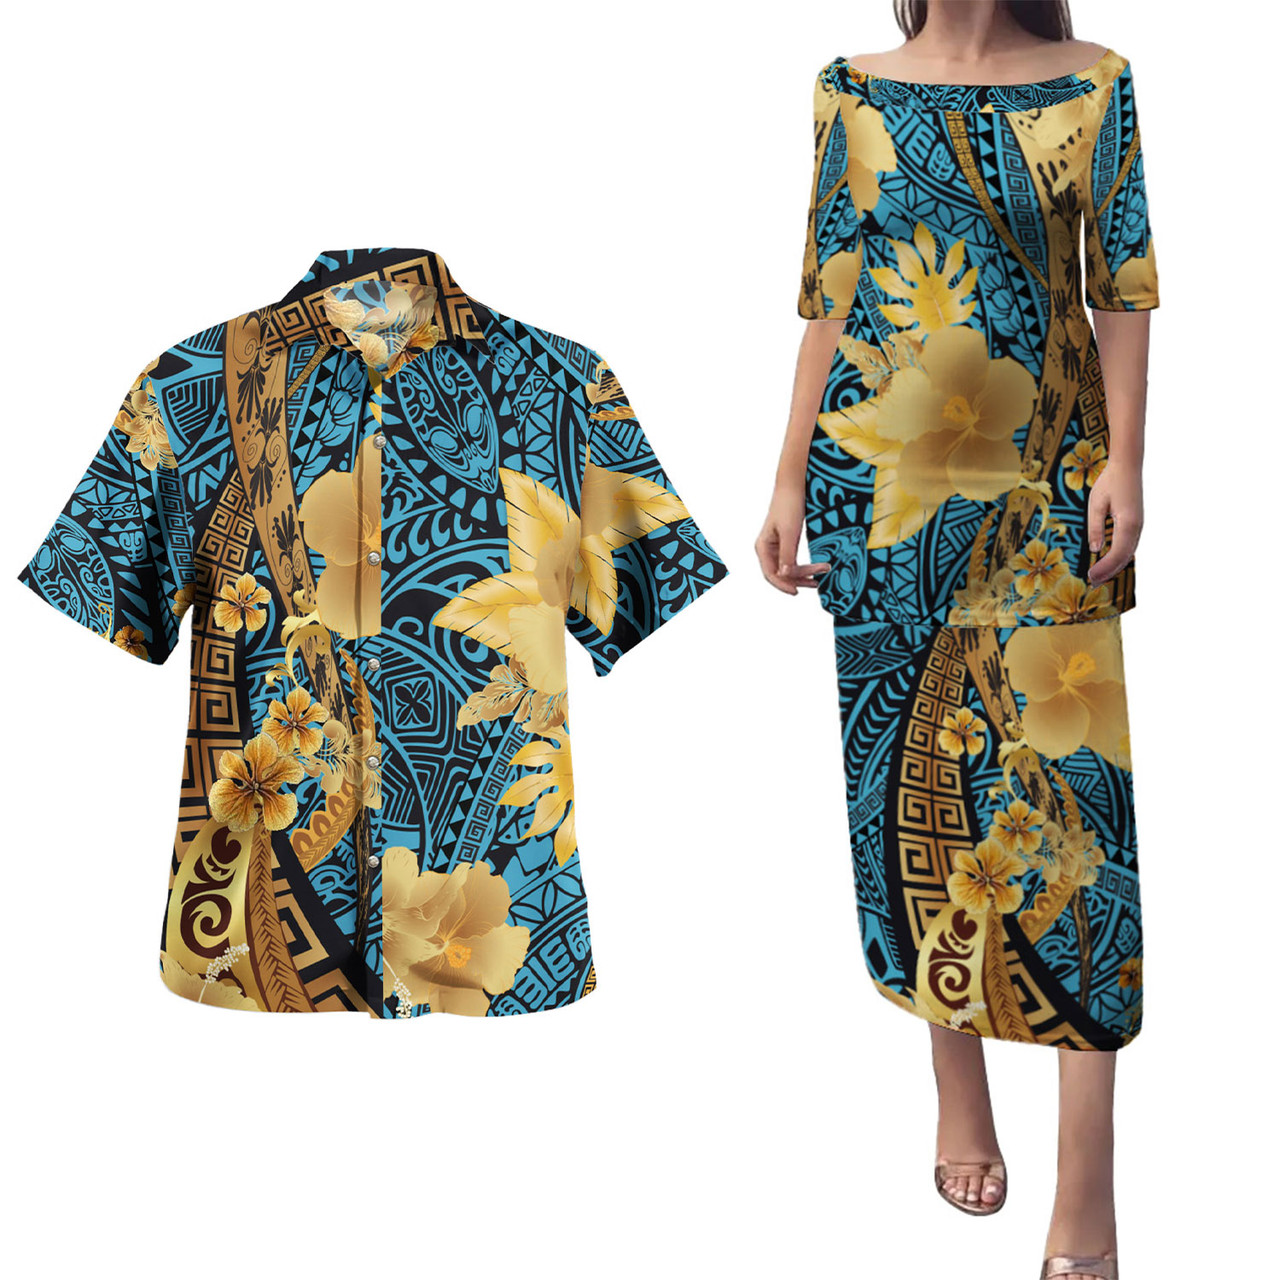 Polynesian Tribal Patterns Hibiscus Flowers Golden Color Puletasi And Shirt